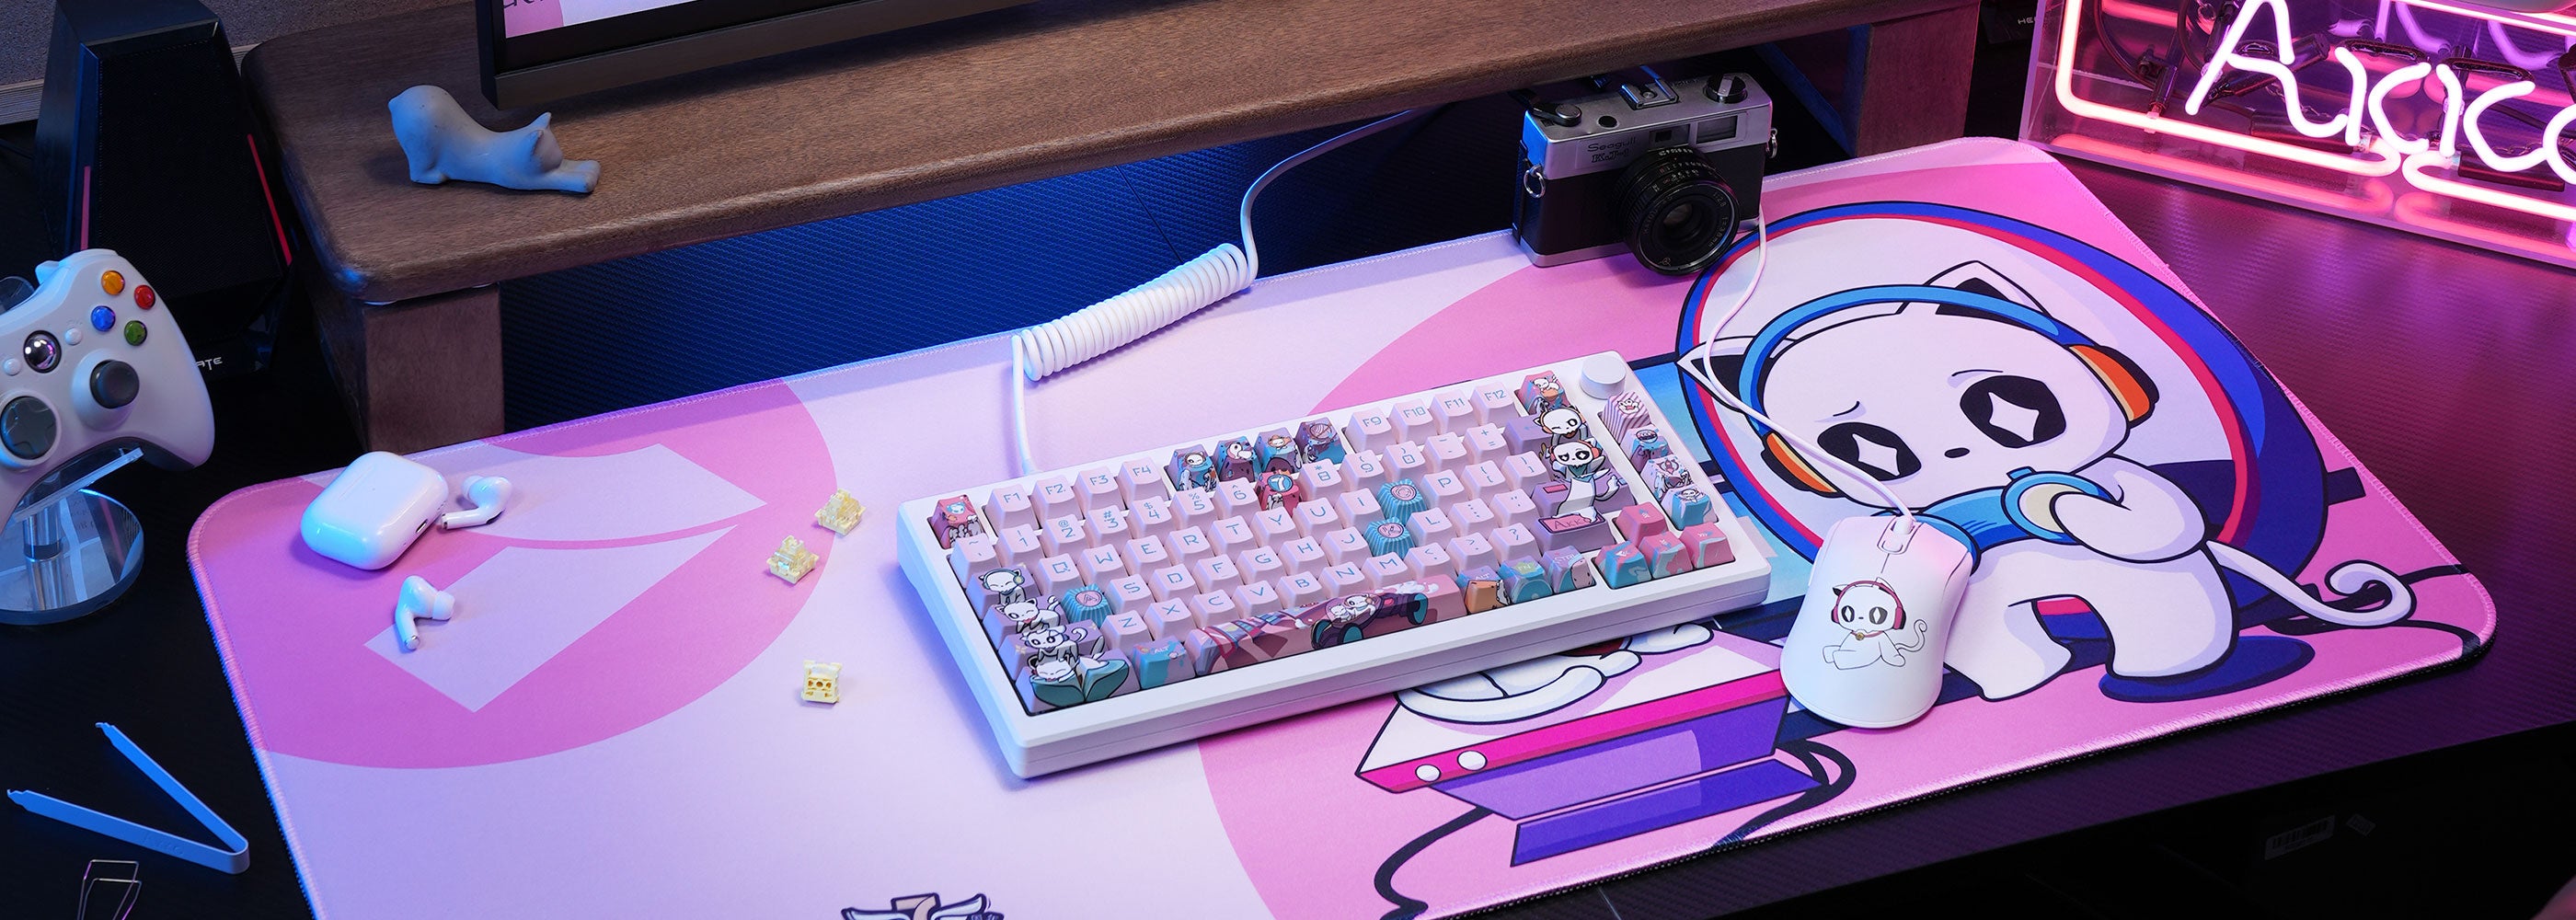 Video laden: Akko 7th Anniversary MOD 007 PC Magnetic Switches Keyboard